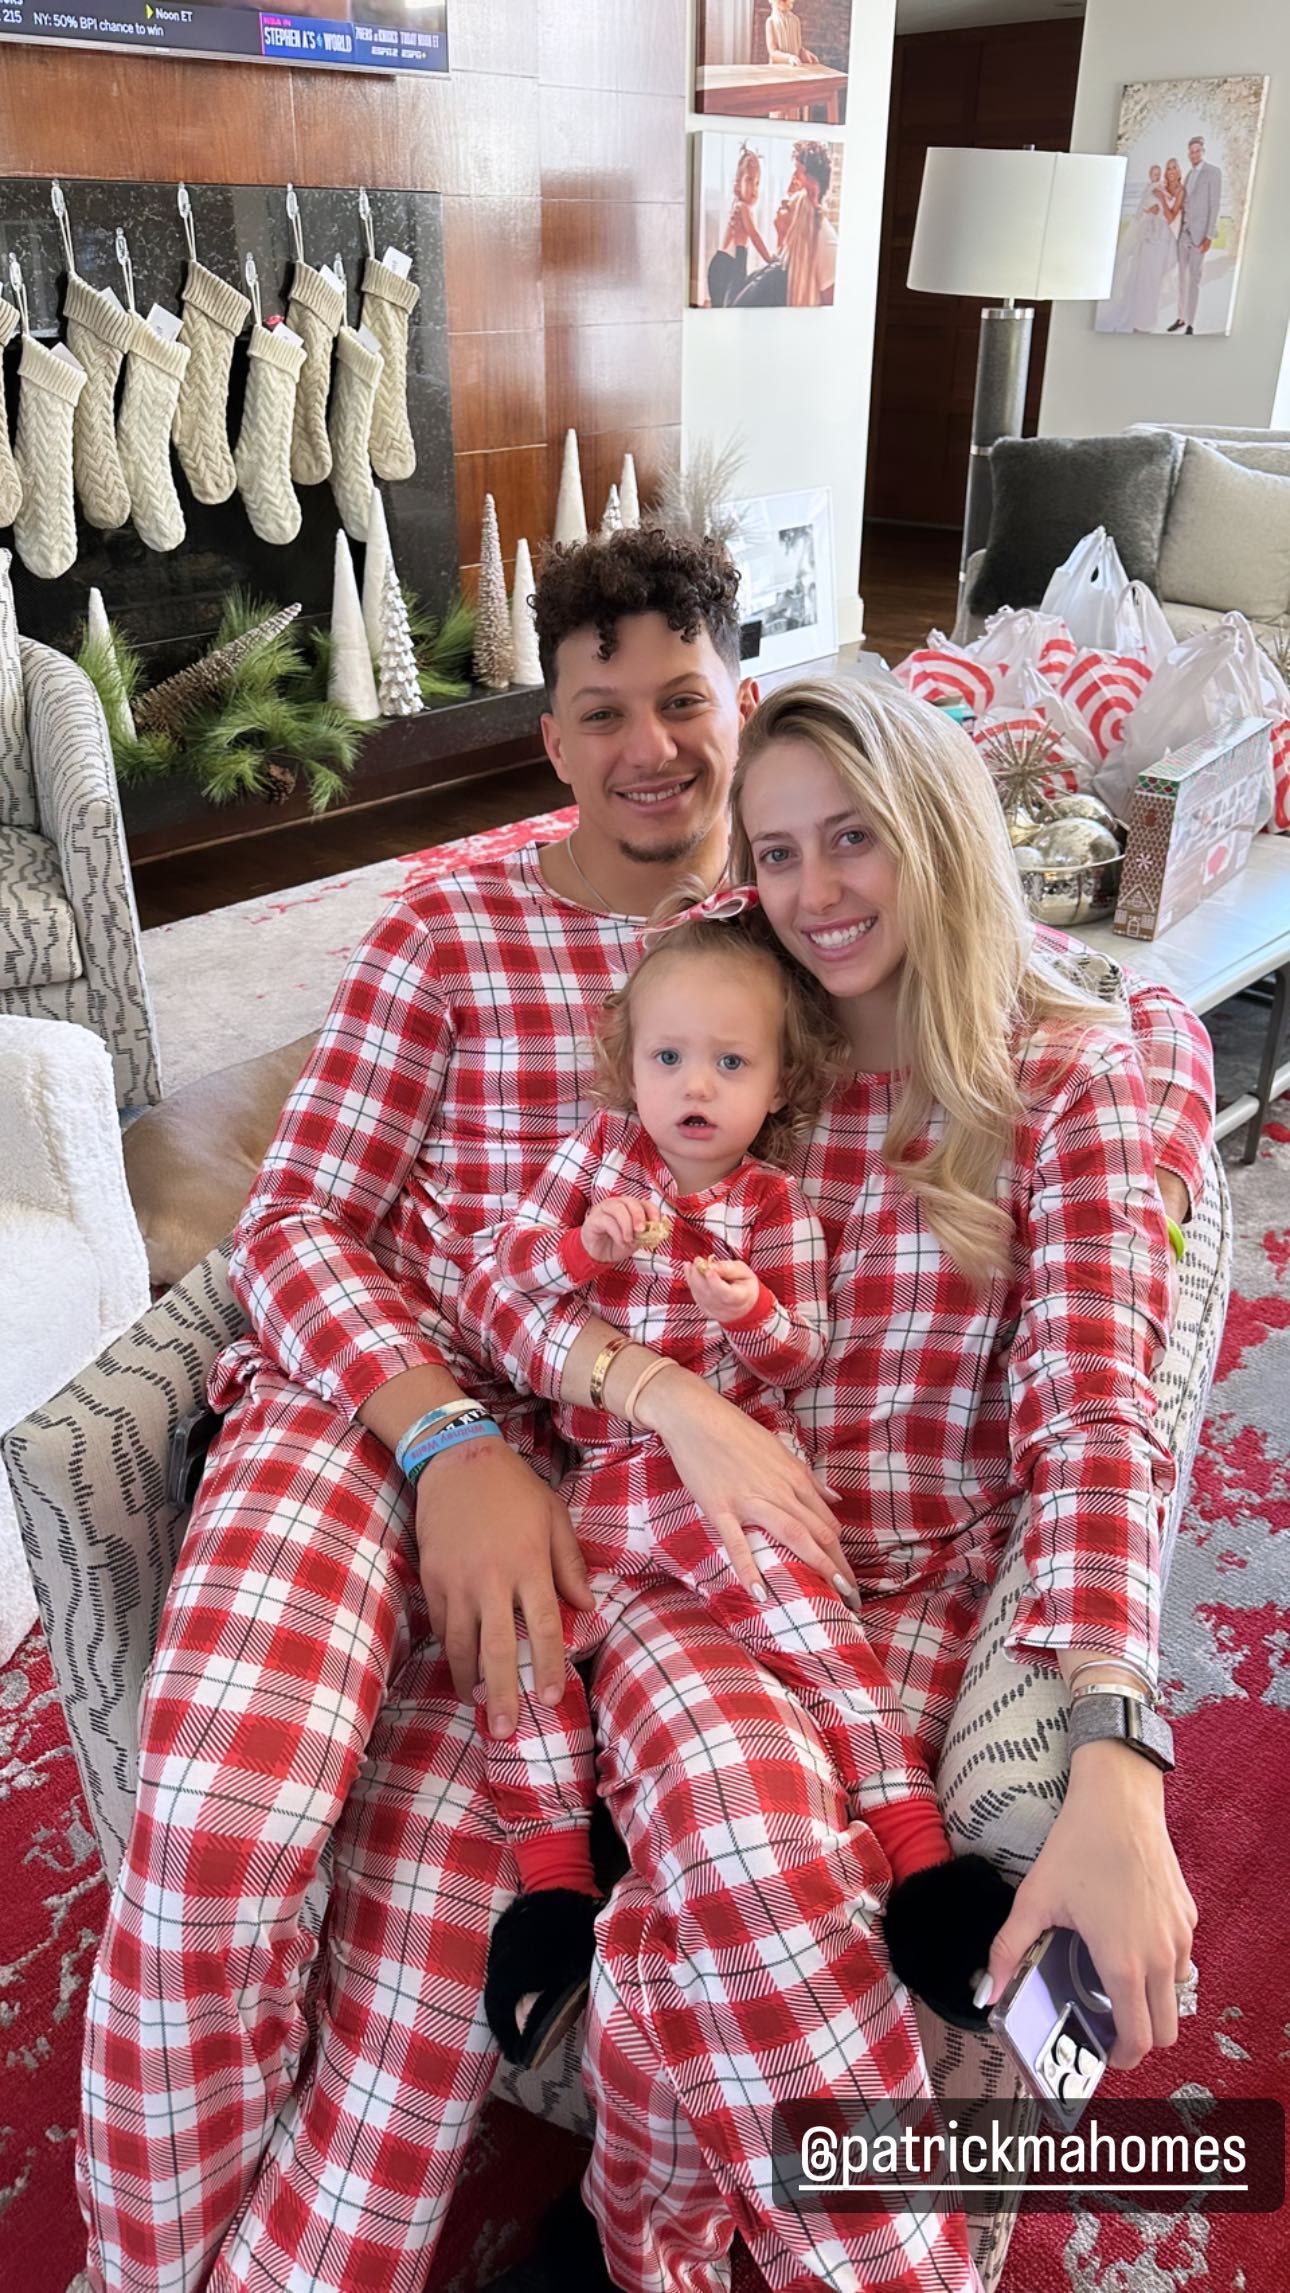 See Patrick and Brittany Mahomes' Daughter Twin With Baby Brother